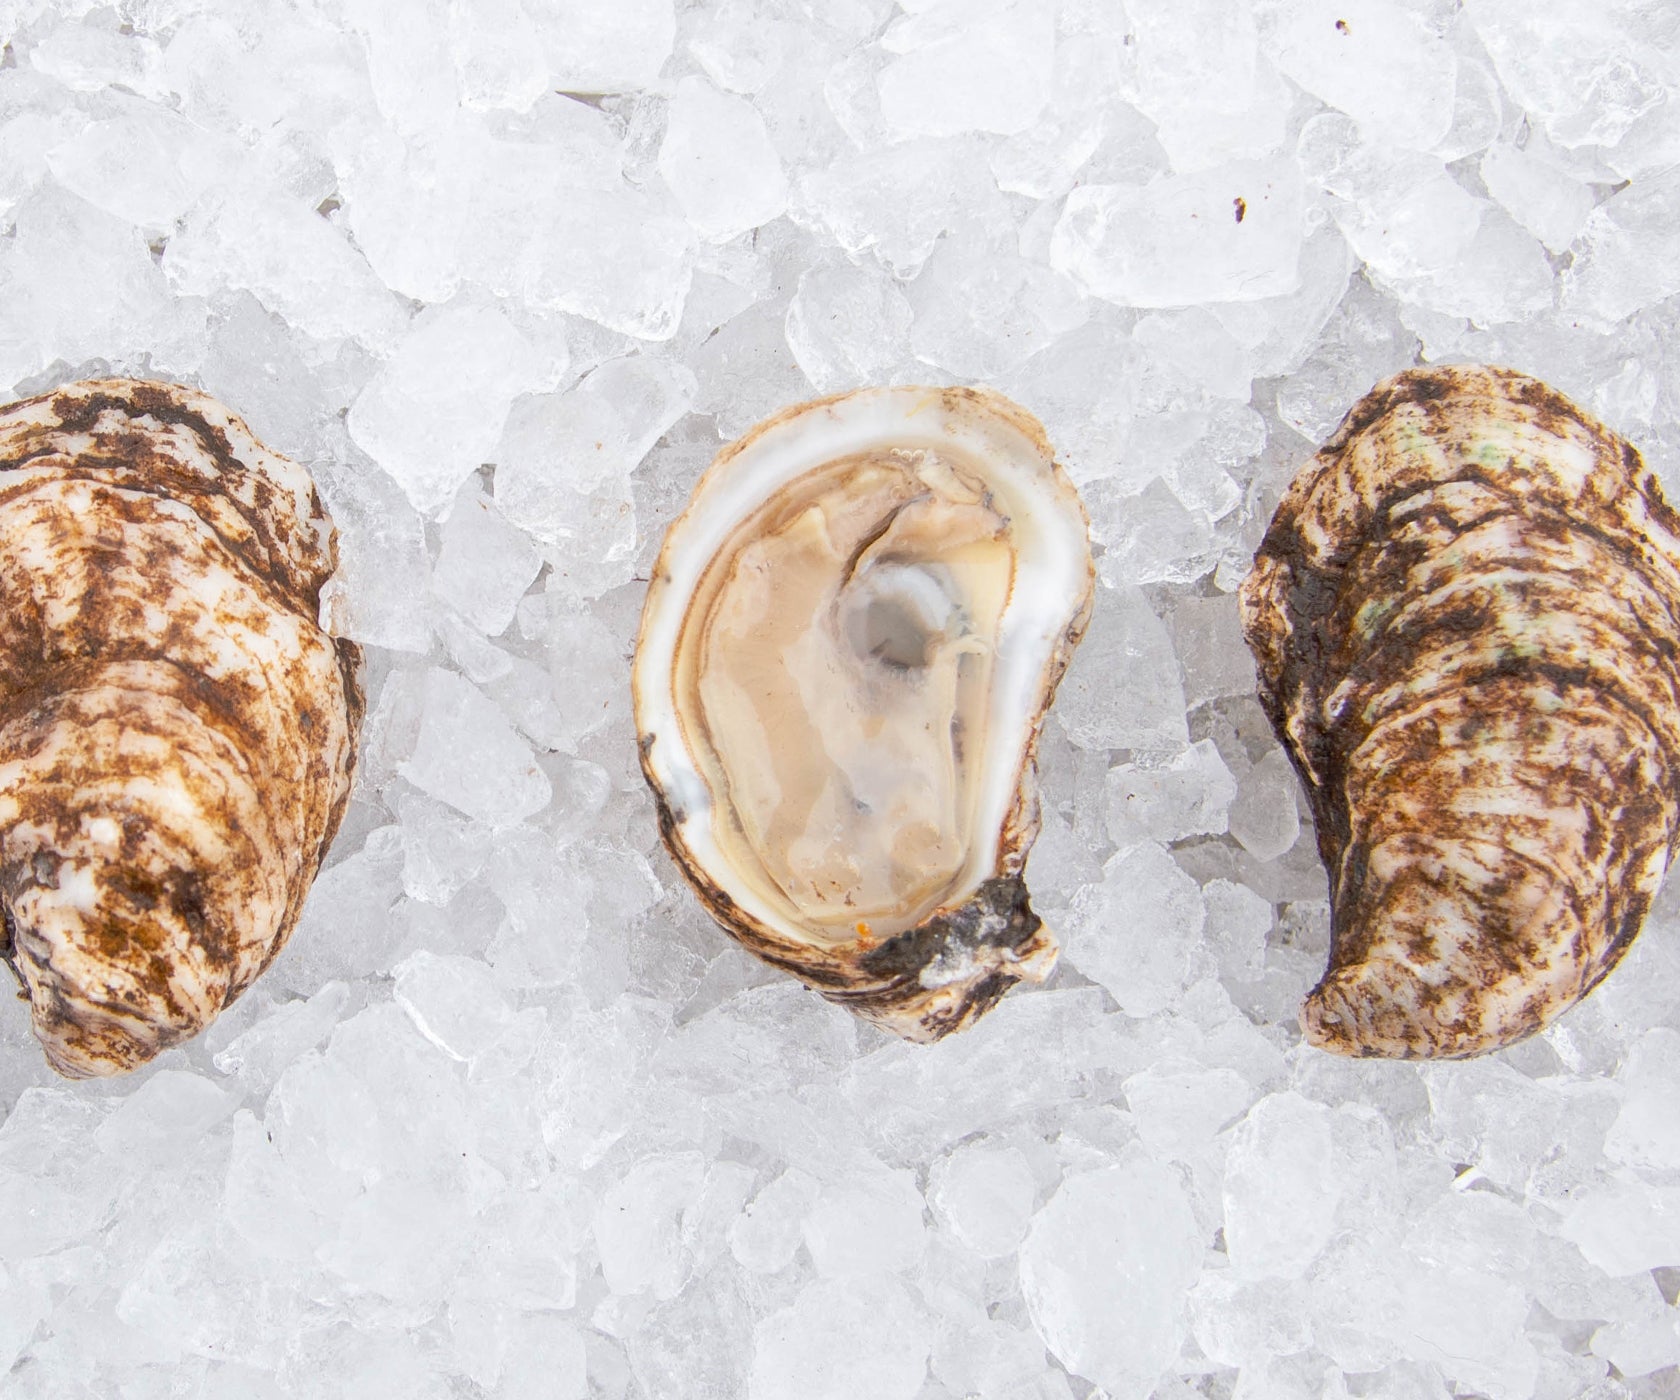 Salt Bay Oysters from Nova Scotia, CAN